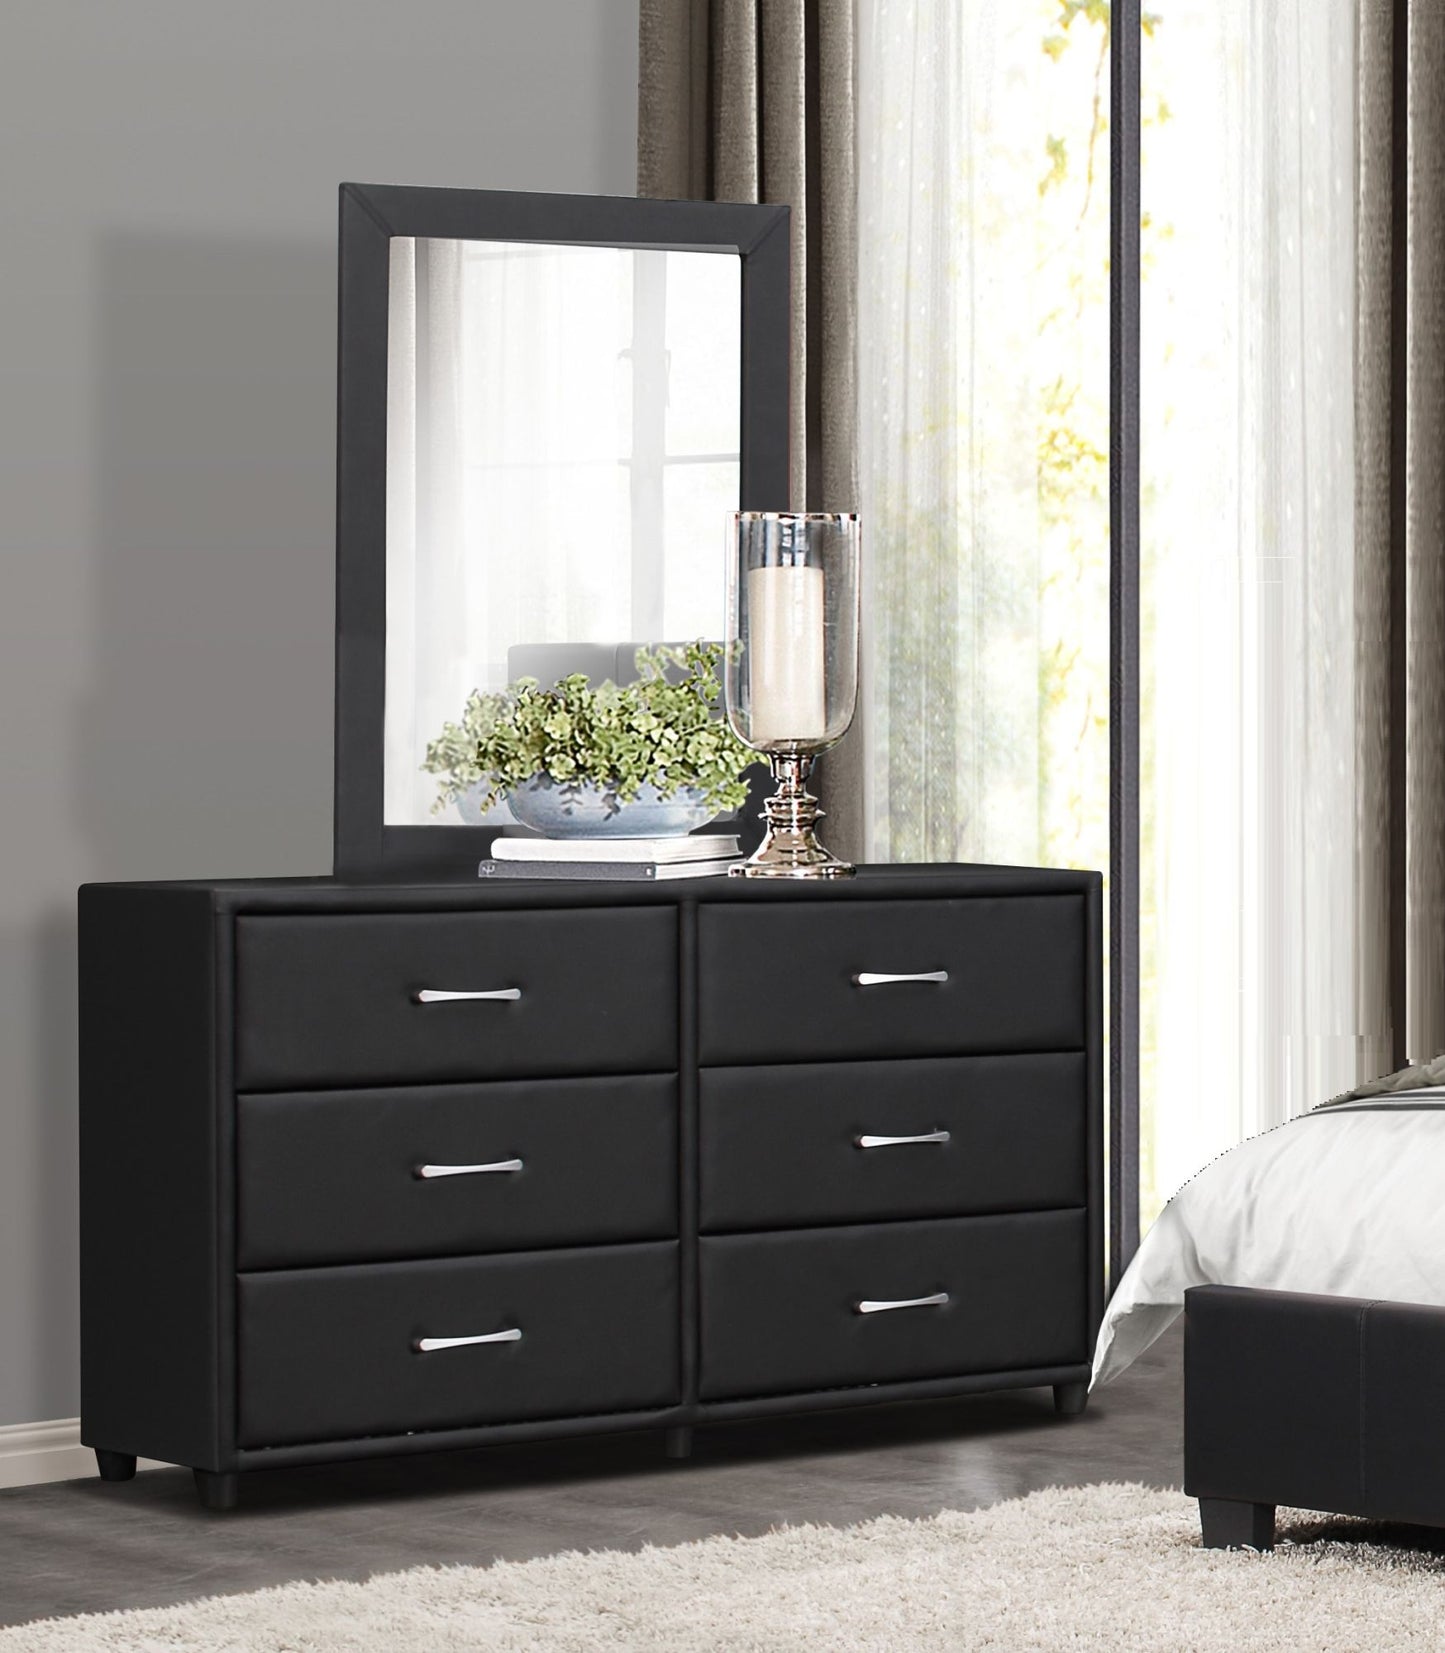 contemporary design black dresser 1pc 6x drawers faux leather upholstery plywood engineered wood